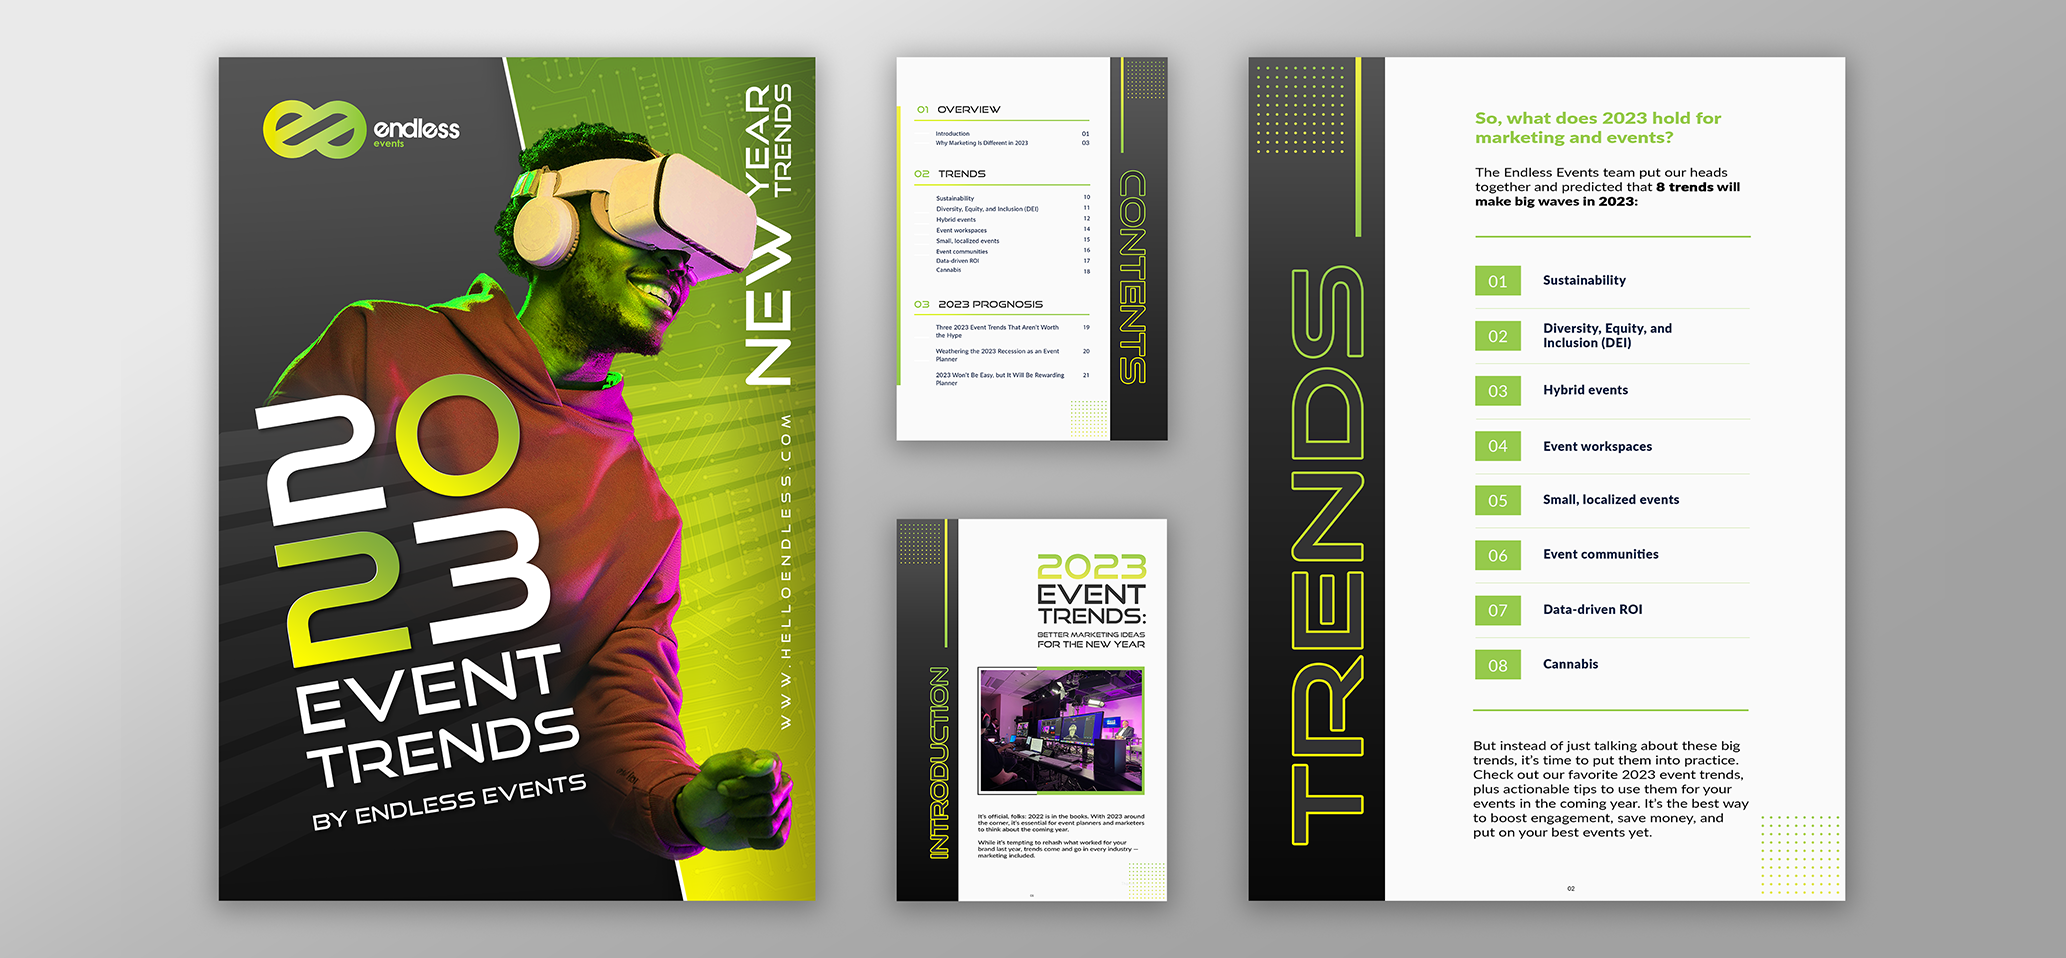 Introducing the 2023 Endless Events Industry Trends Guide